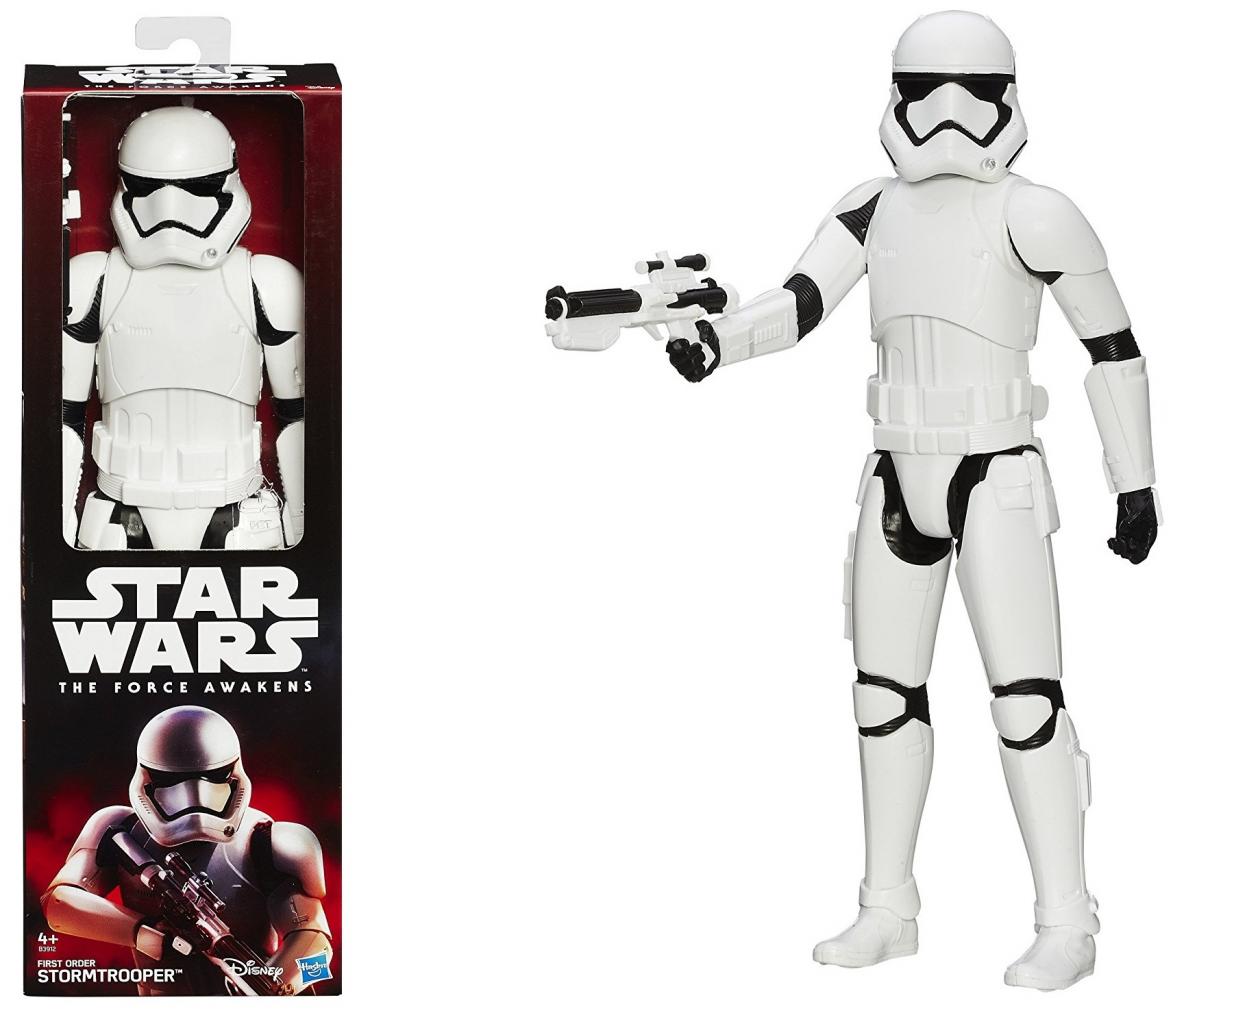 Star Wars The Force Awakens 12 inch First Order Stormtrooper
     /  

165